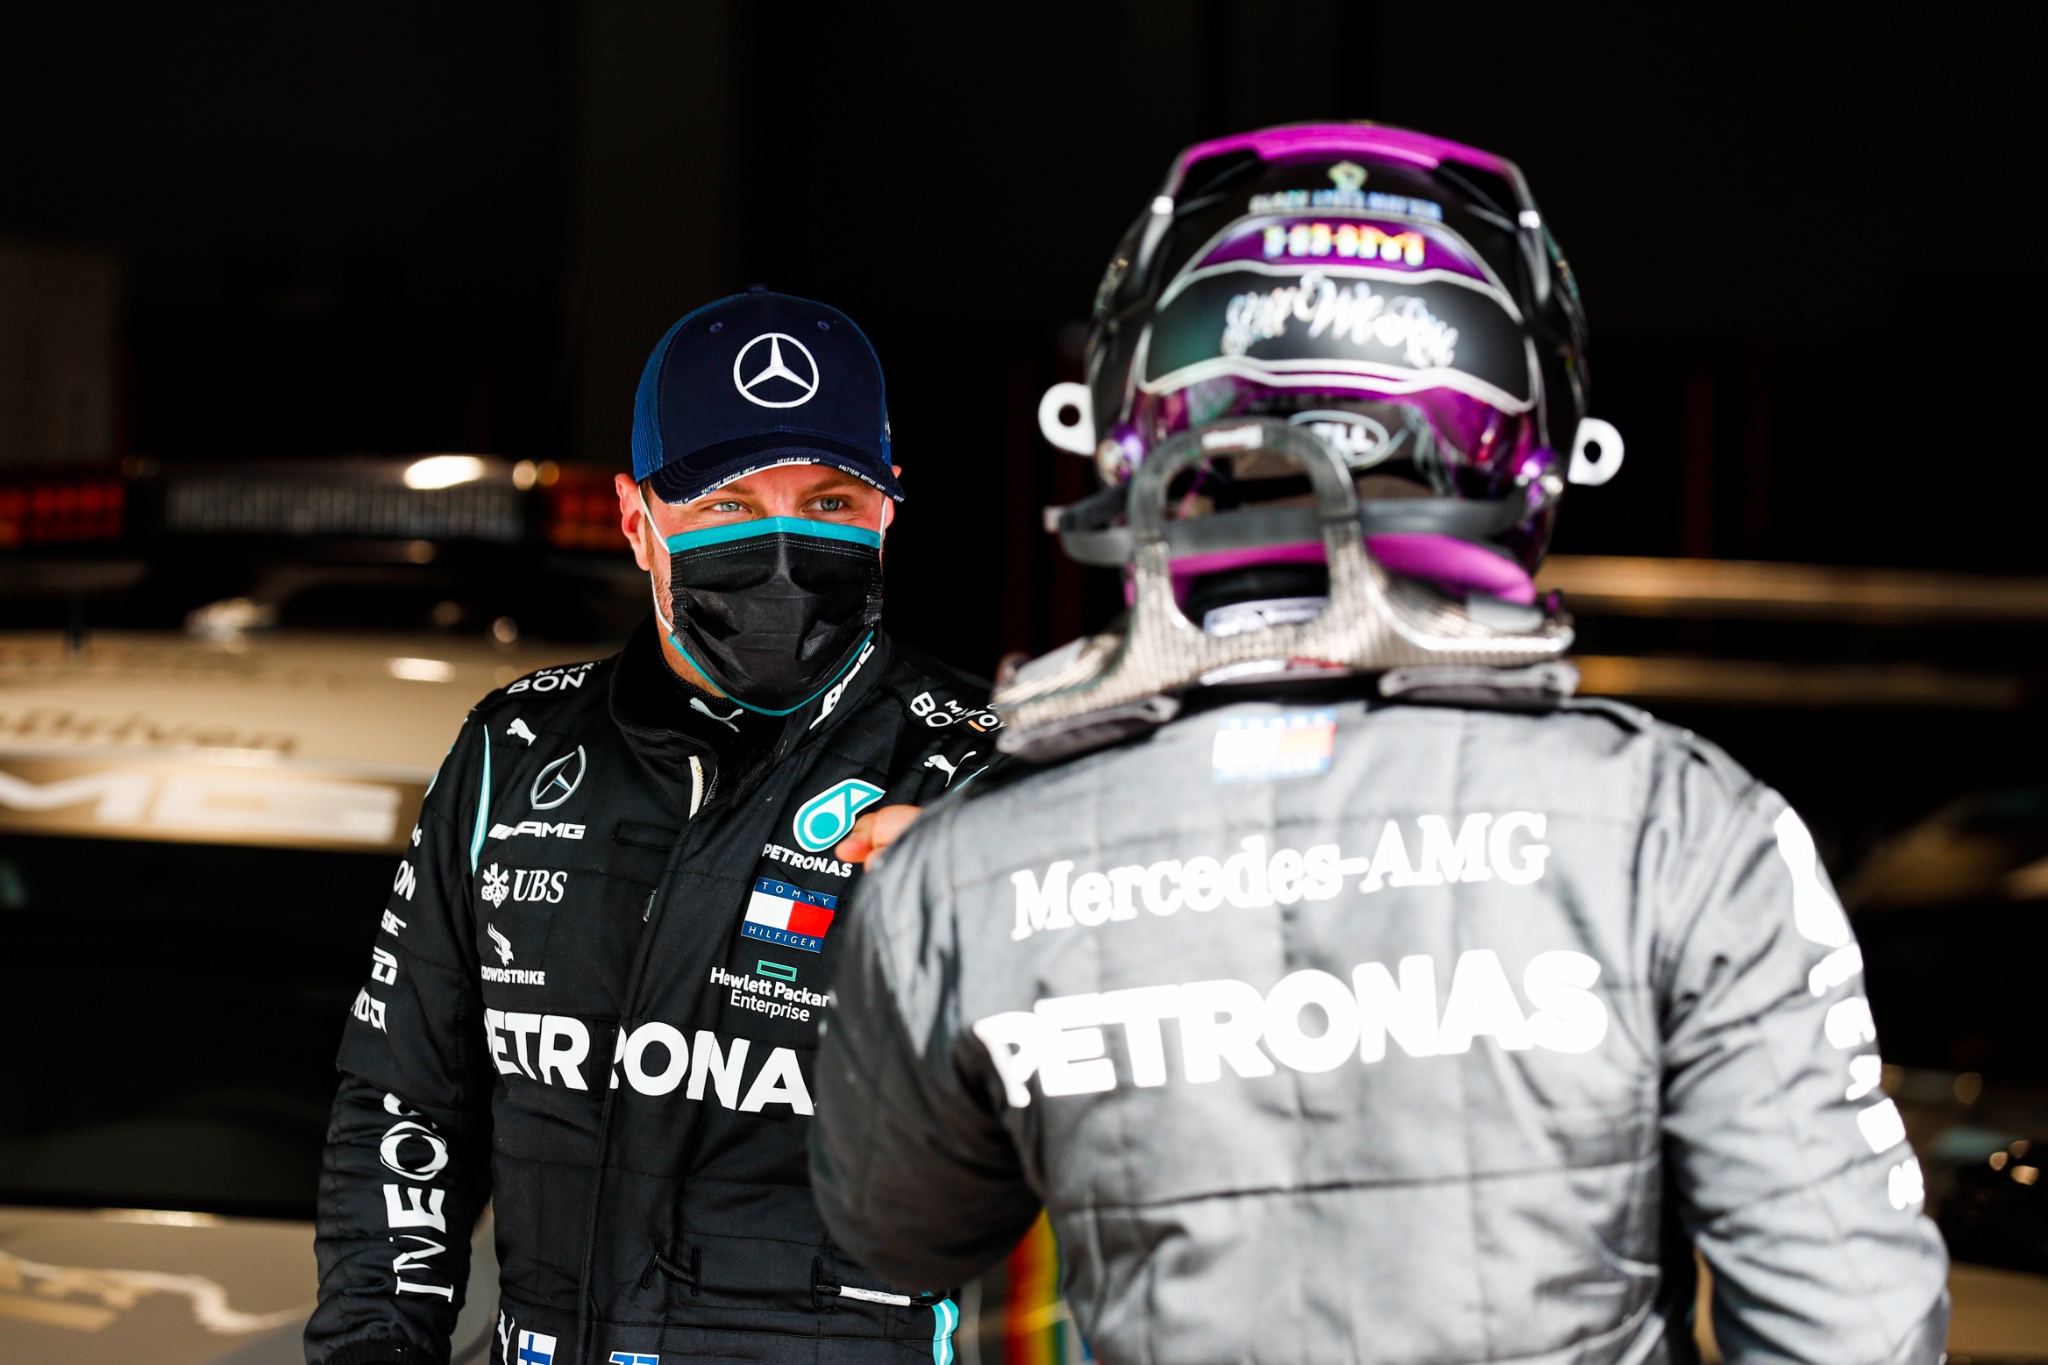 (L to R): Valtteri Bottas (FIN) Mercedes AMG F1 with team mate Lewis Hamilton (GBR) Mercedes AMG F1 in qualifying parc ferme.